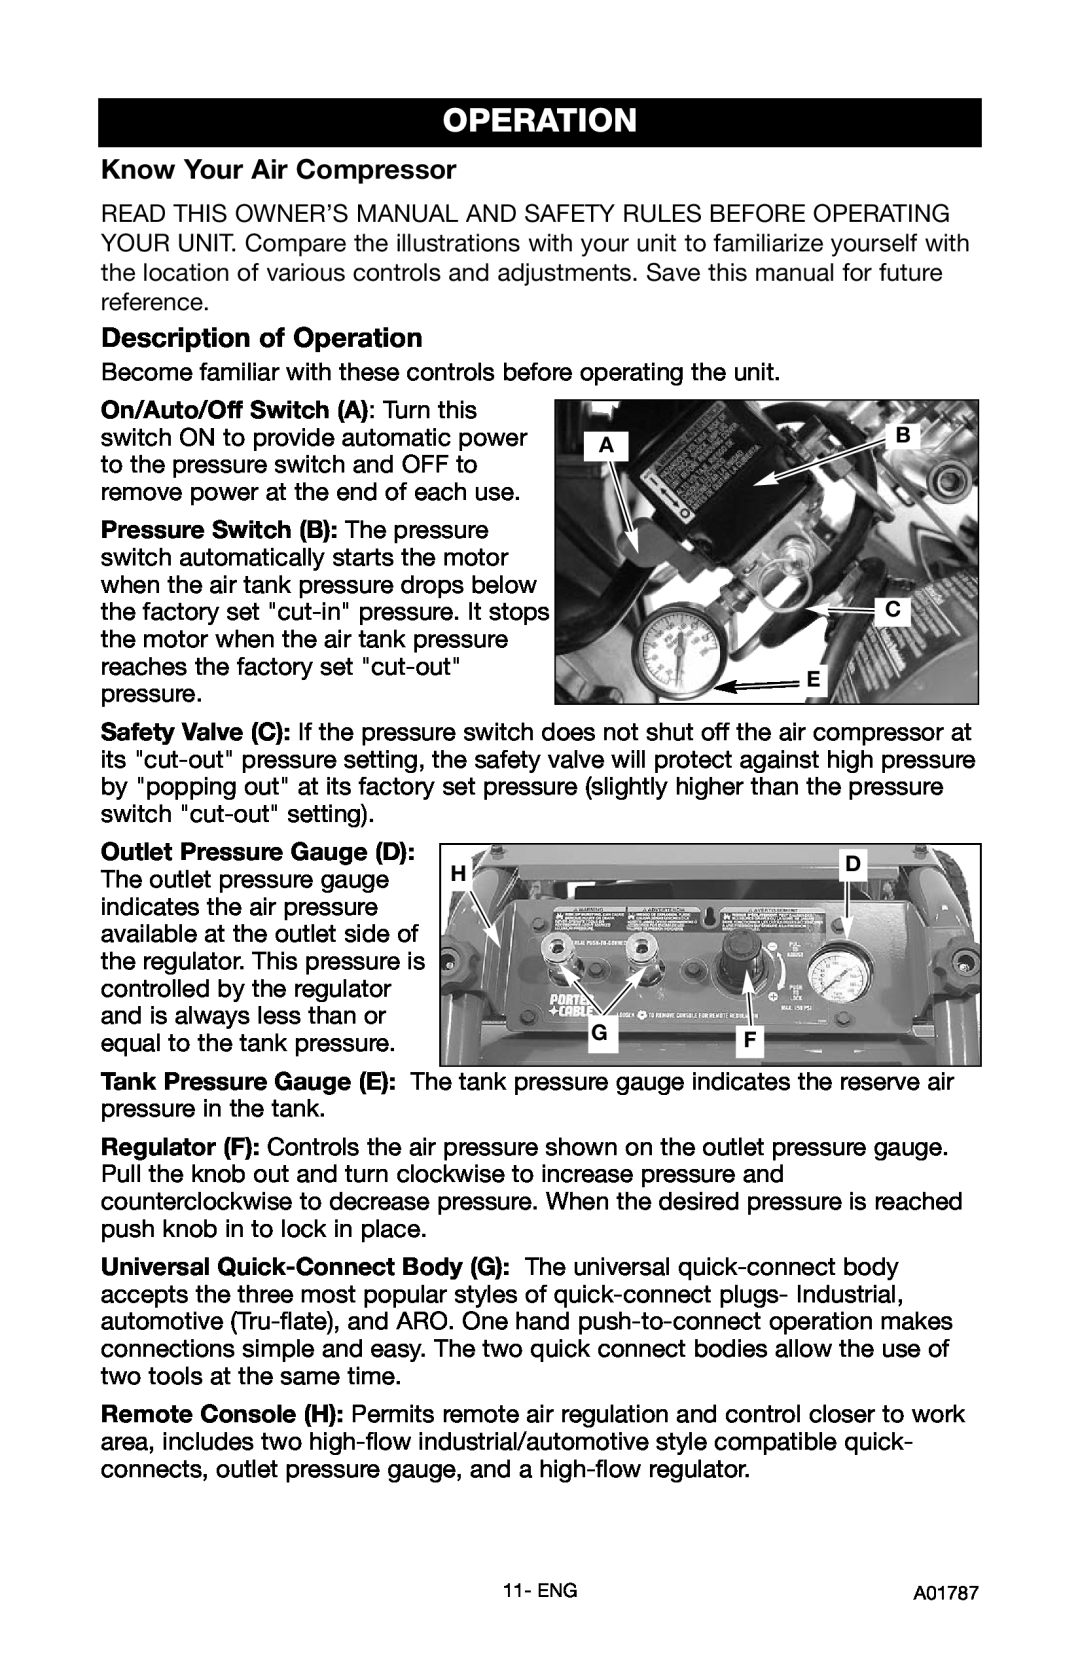 Porter-Cable CFFR350B, CFFC350B instruction manual Know Your Air Compressor, Description of Operation 